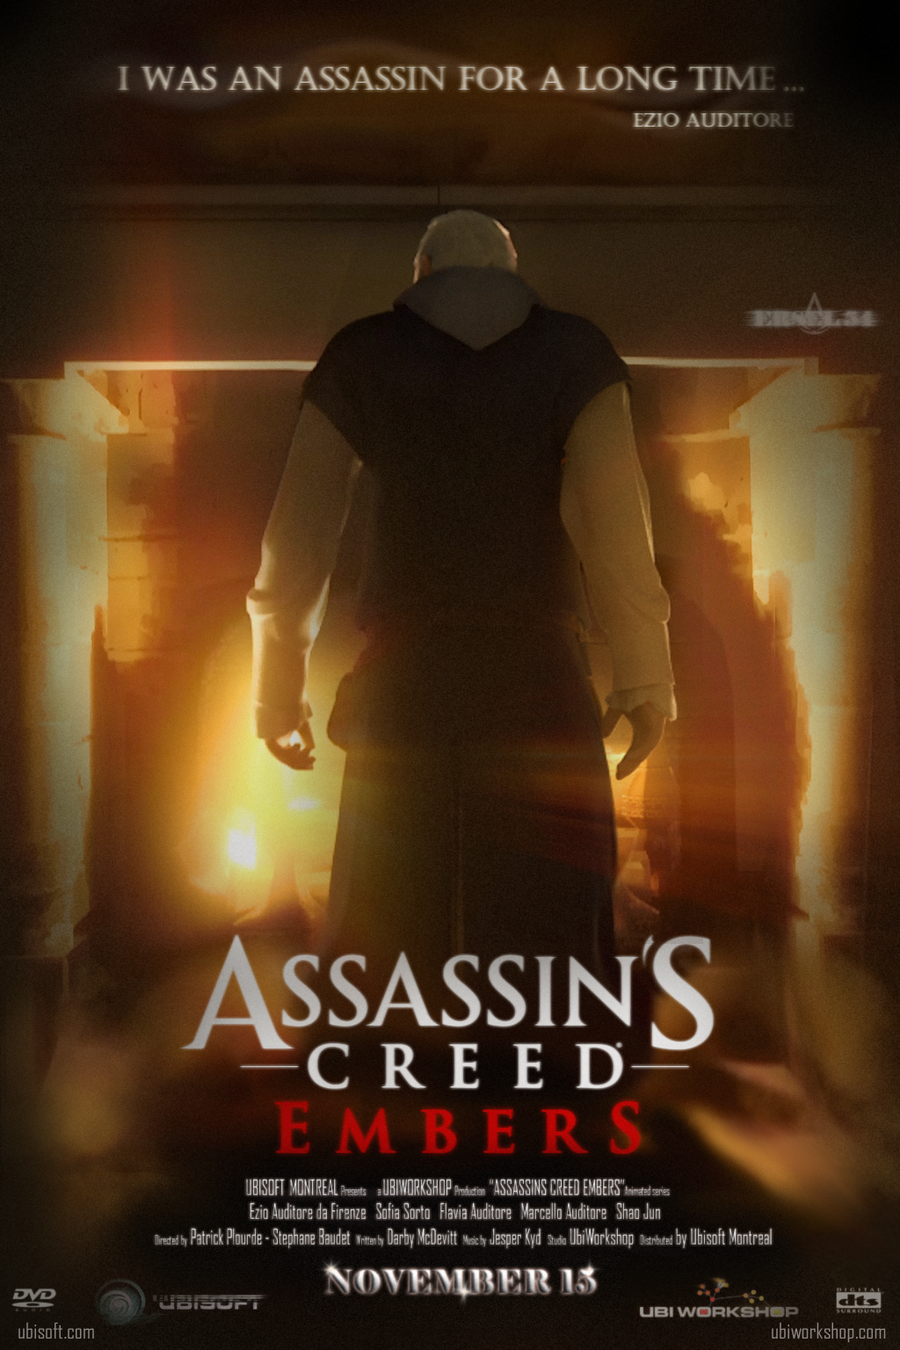 affiche du film Assassin's Creed Embers